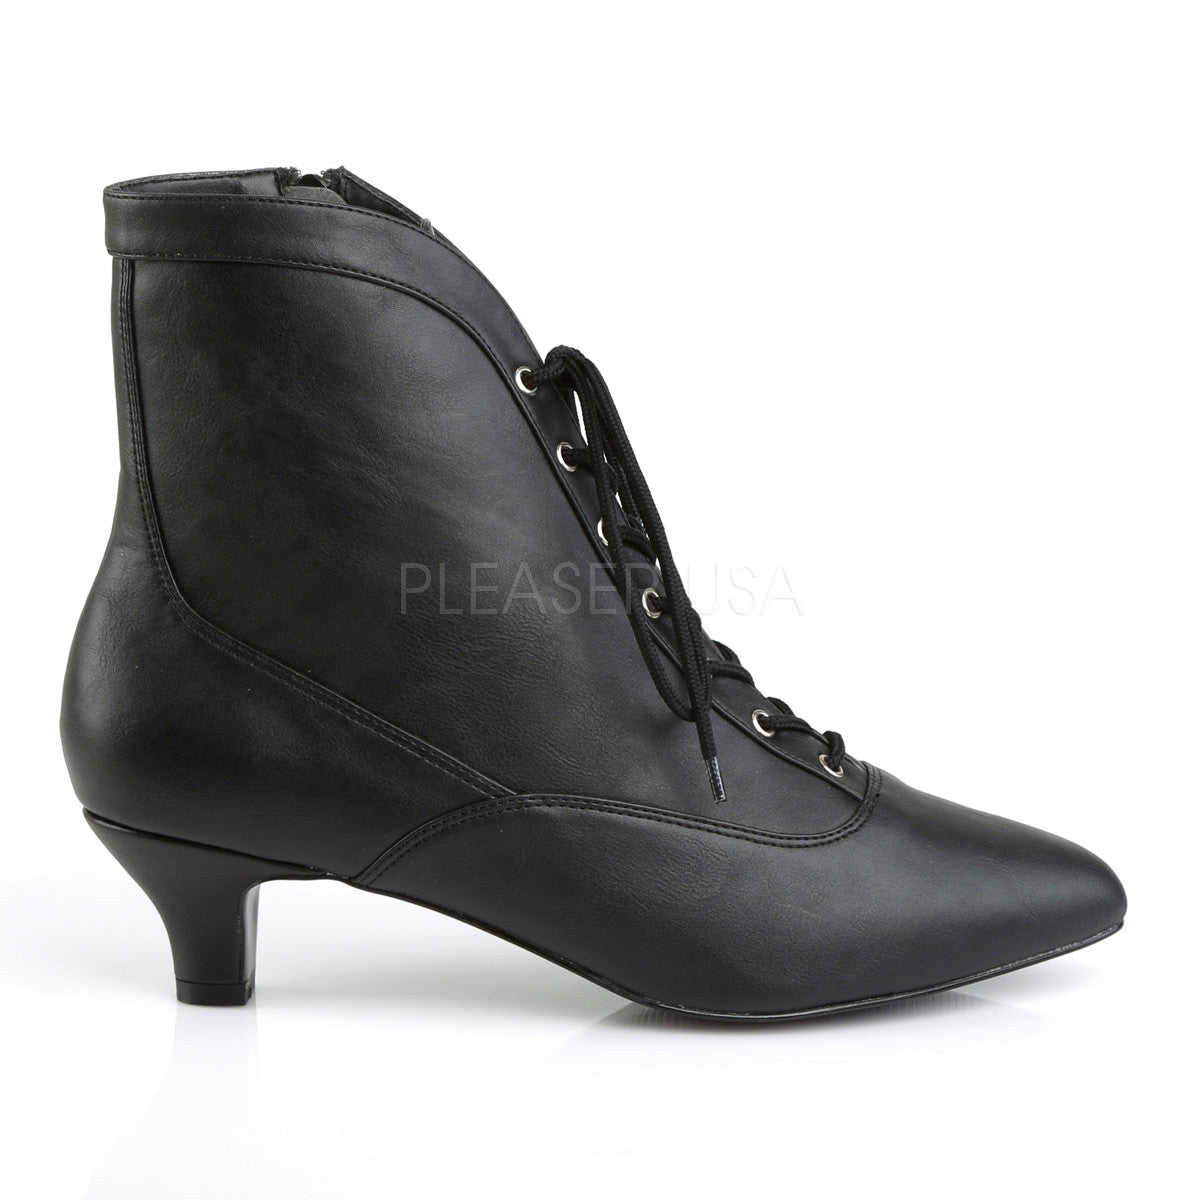 2 Inch Heel Black Plus Size Ankle Boots For Cross Dresser | FAB-1005 ...